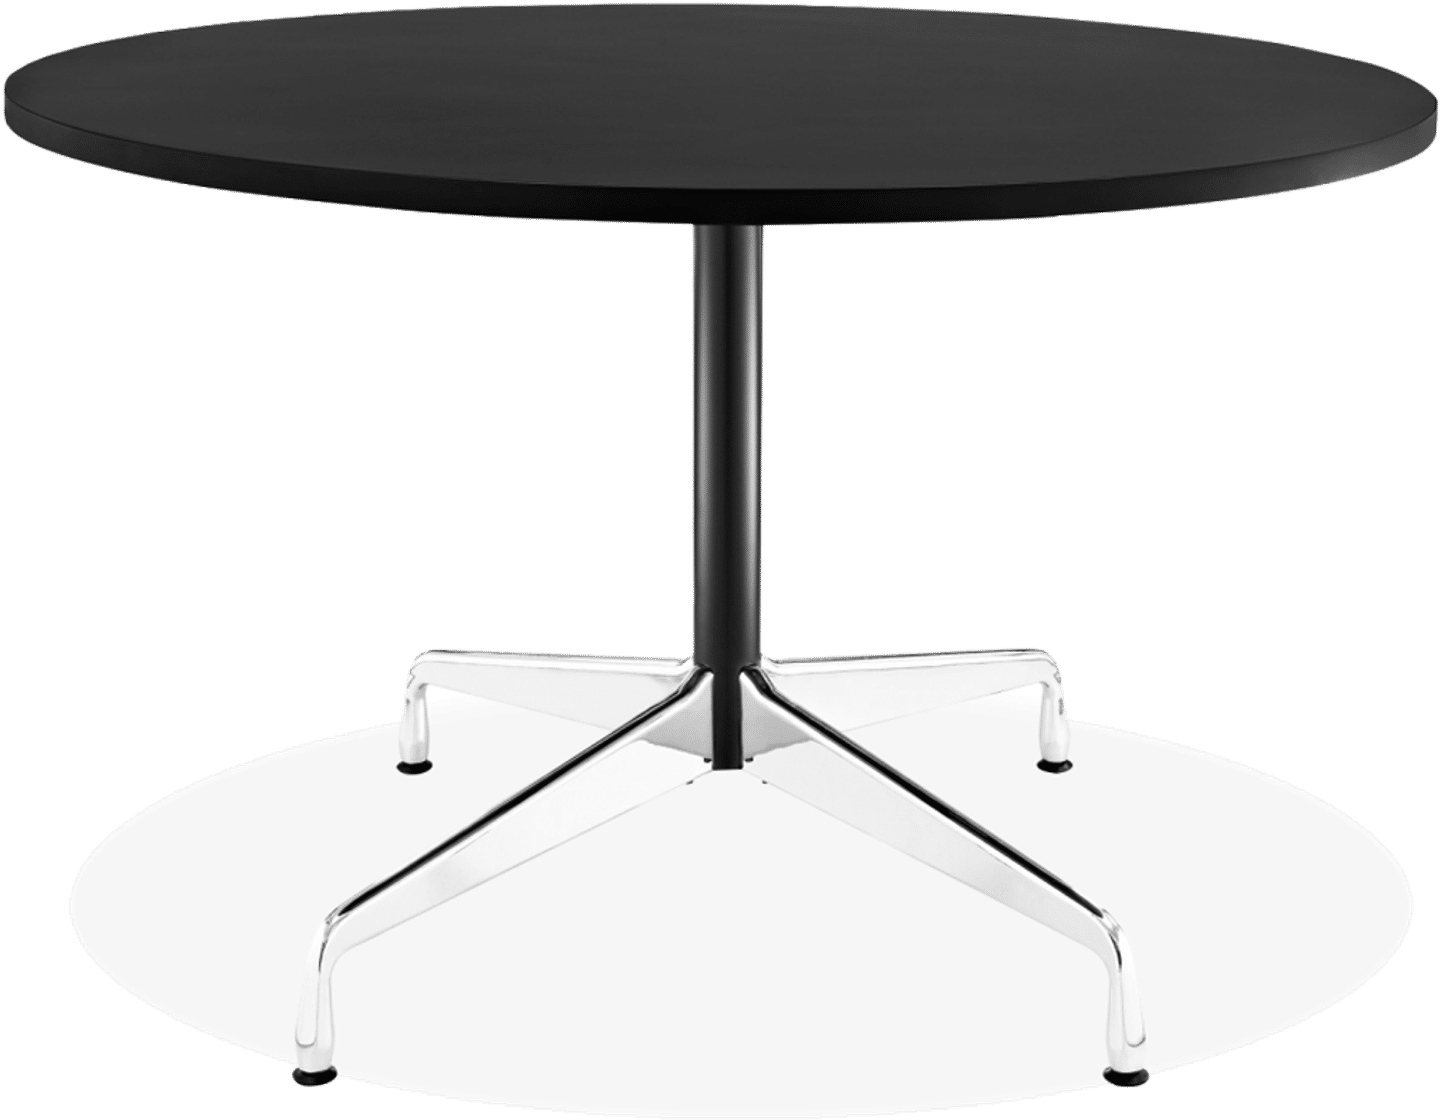 Eames Style Round Conference Table Black/105 CM image.